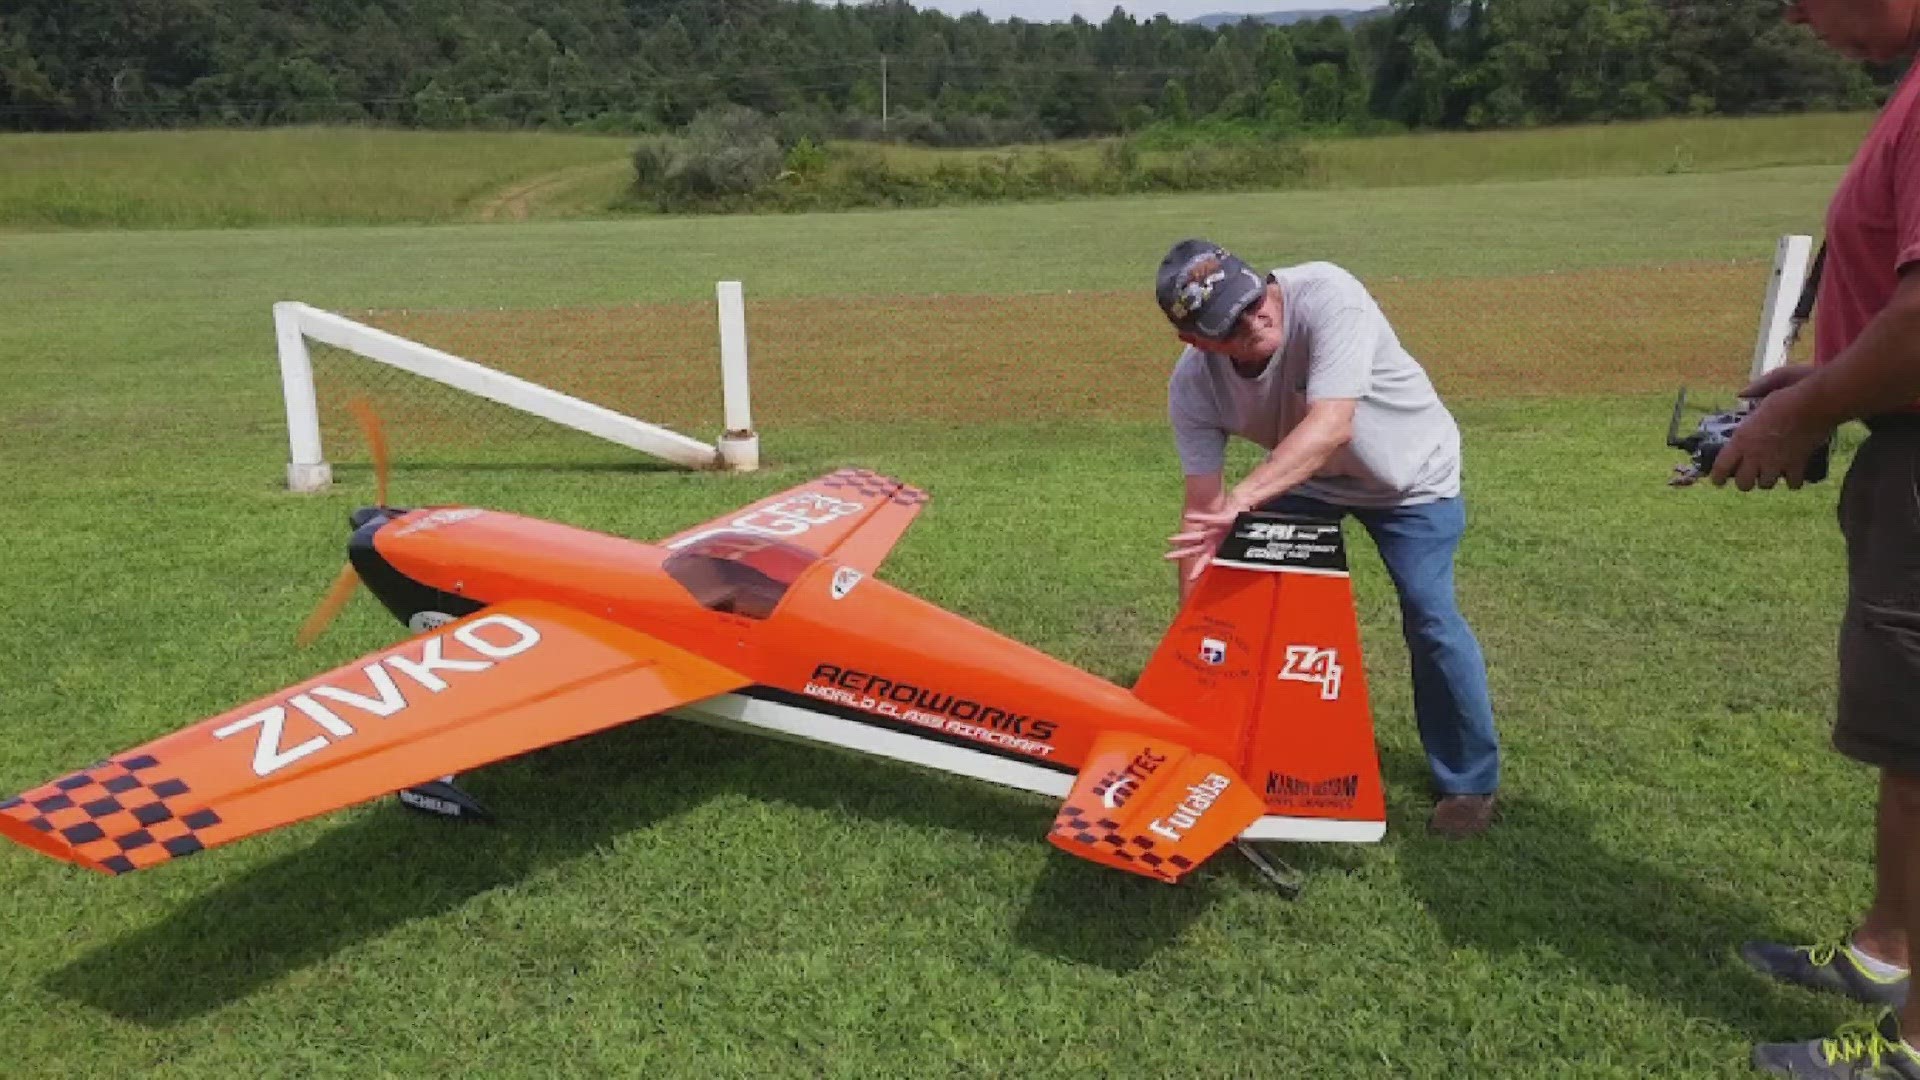 The event will be on April 22, with demonstrations of remote-controlled aircraft zooming through the air in Harriman.